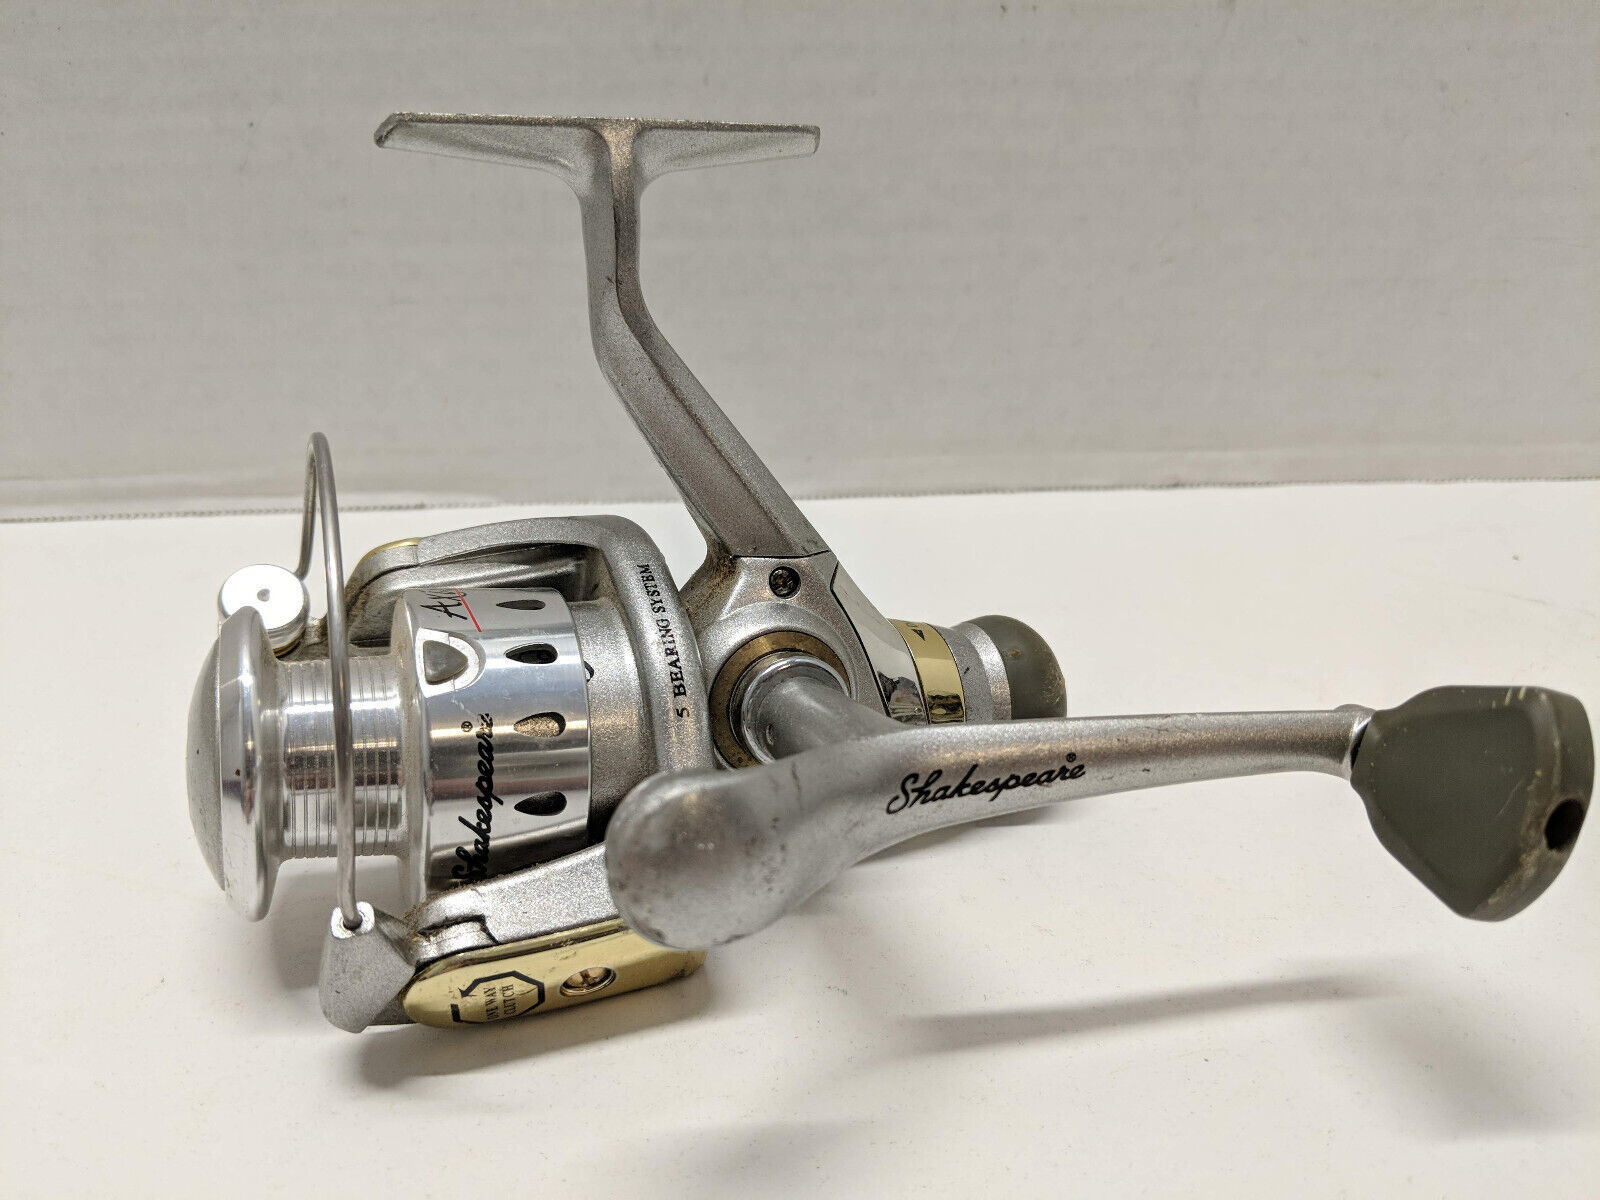 Shakespeare AXIOM 4535 Spinning Reel, 5 and 50 similar items